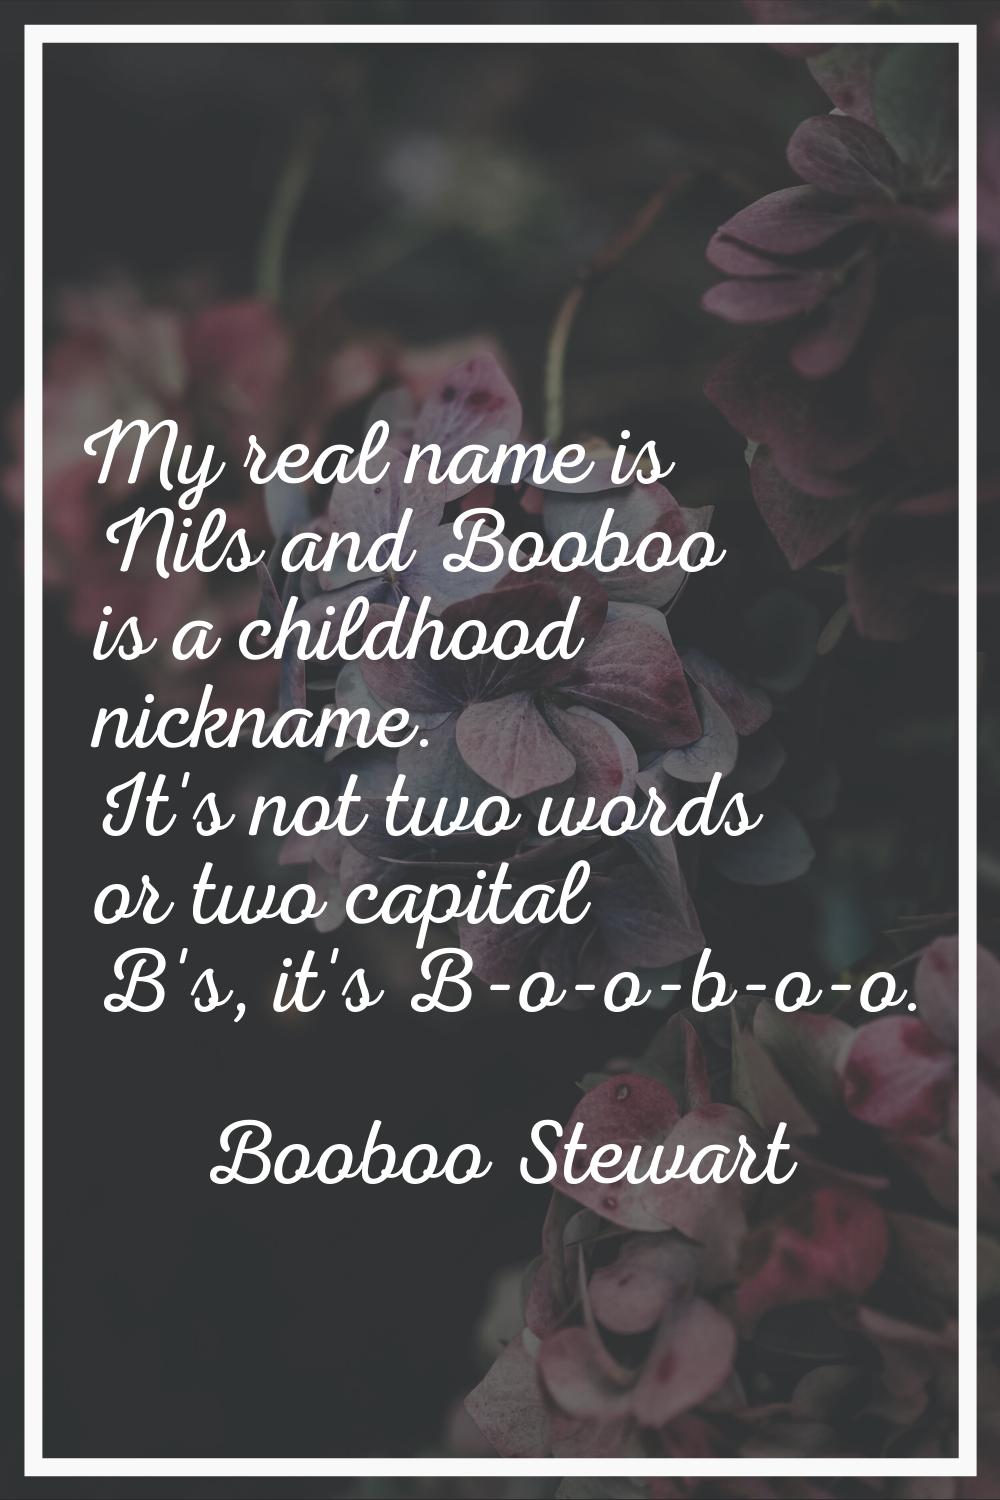 My real name is Nils and Booboo is a childhood nickname. It's not two words or two capital B's, it'